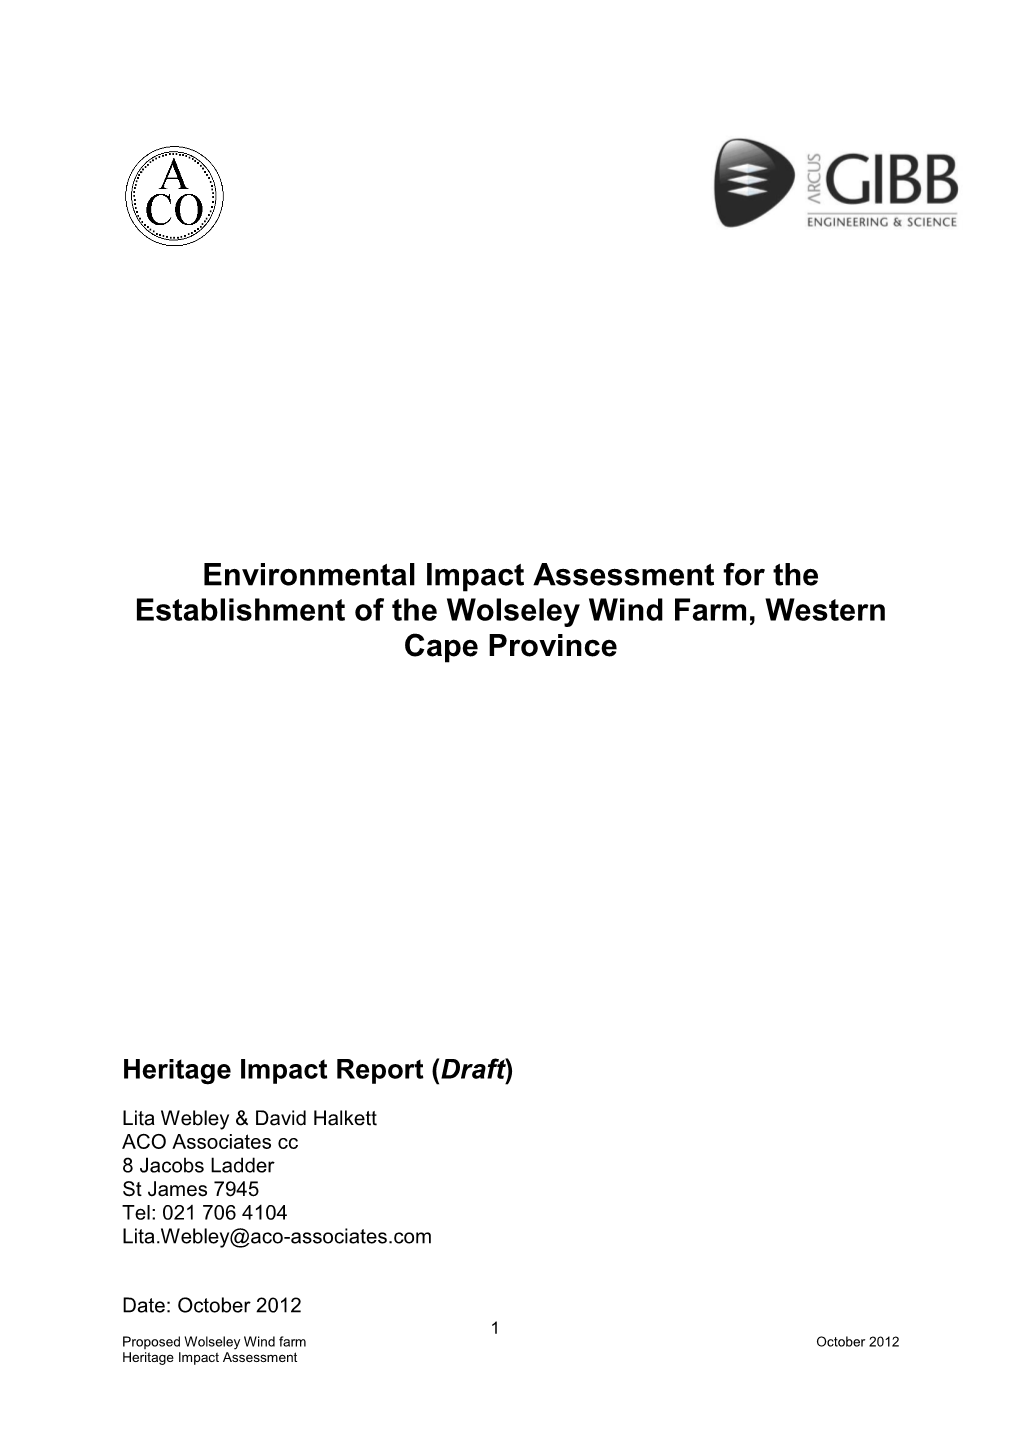 Environmental Impact Assessment for the Establishment of the Wolseley Wind Farm, Western Cape Province